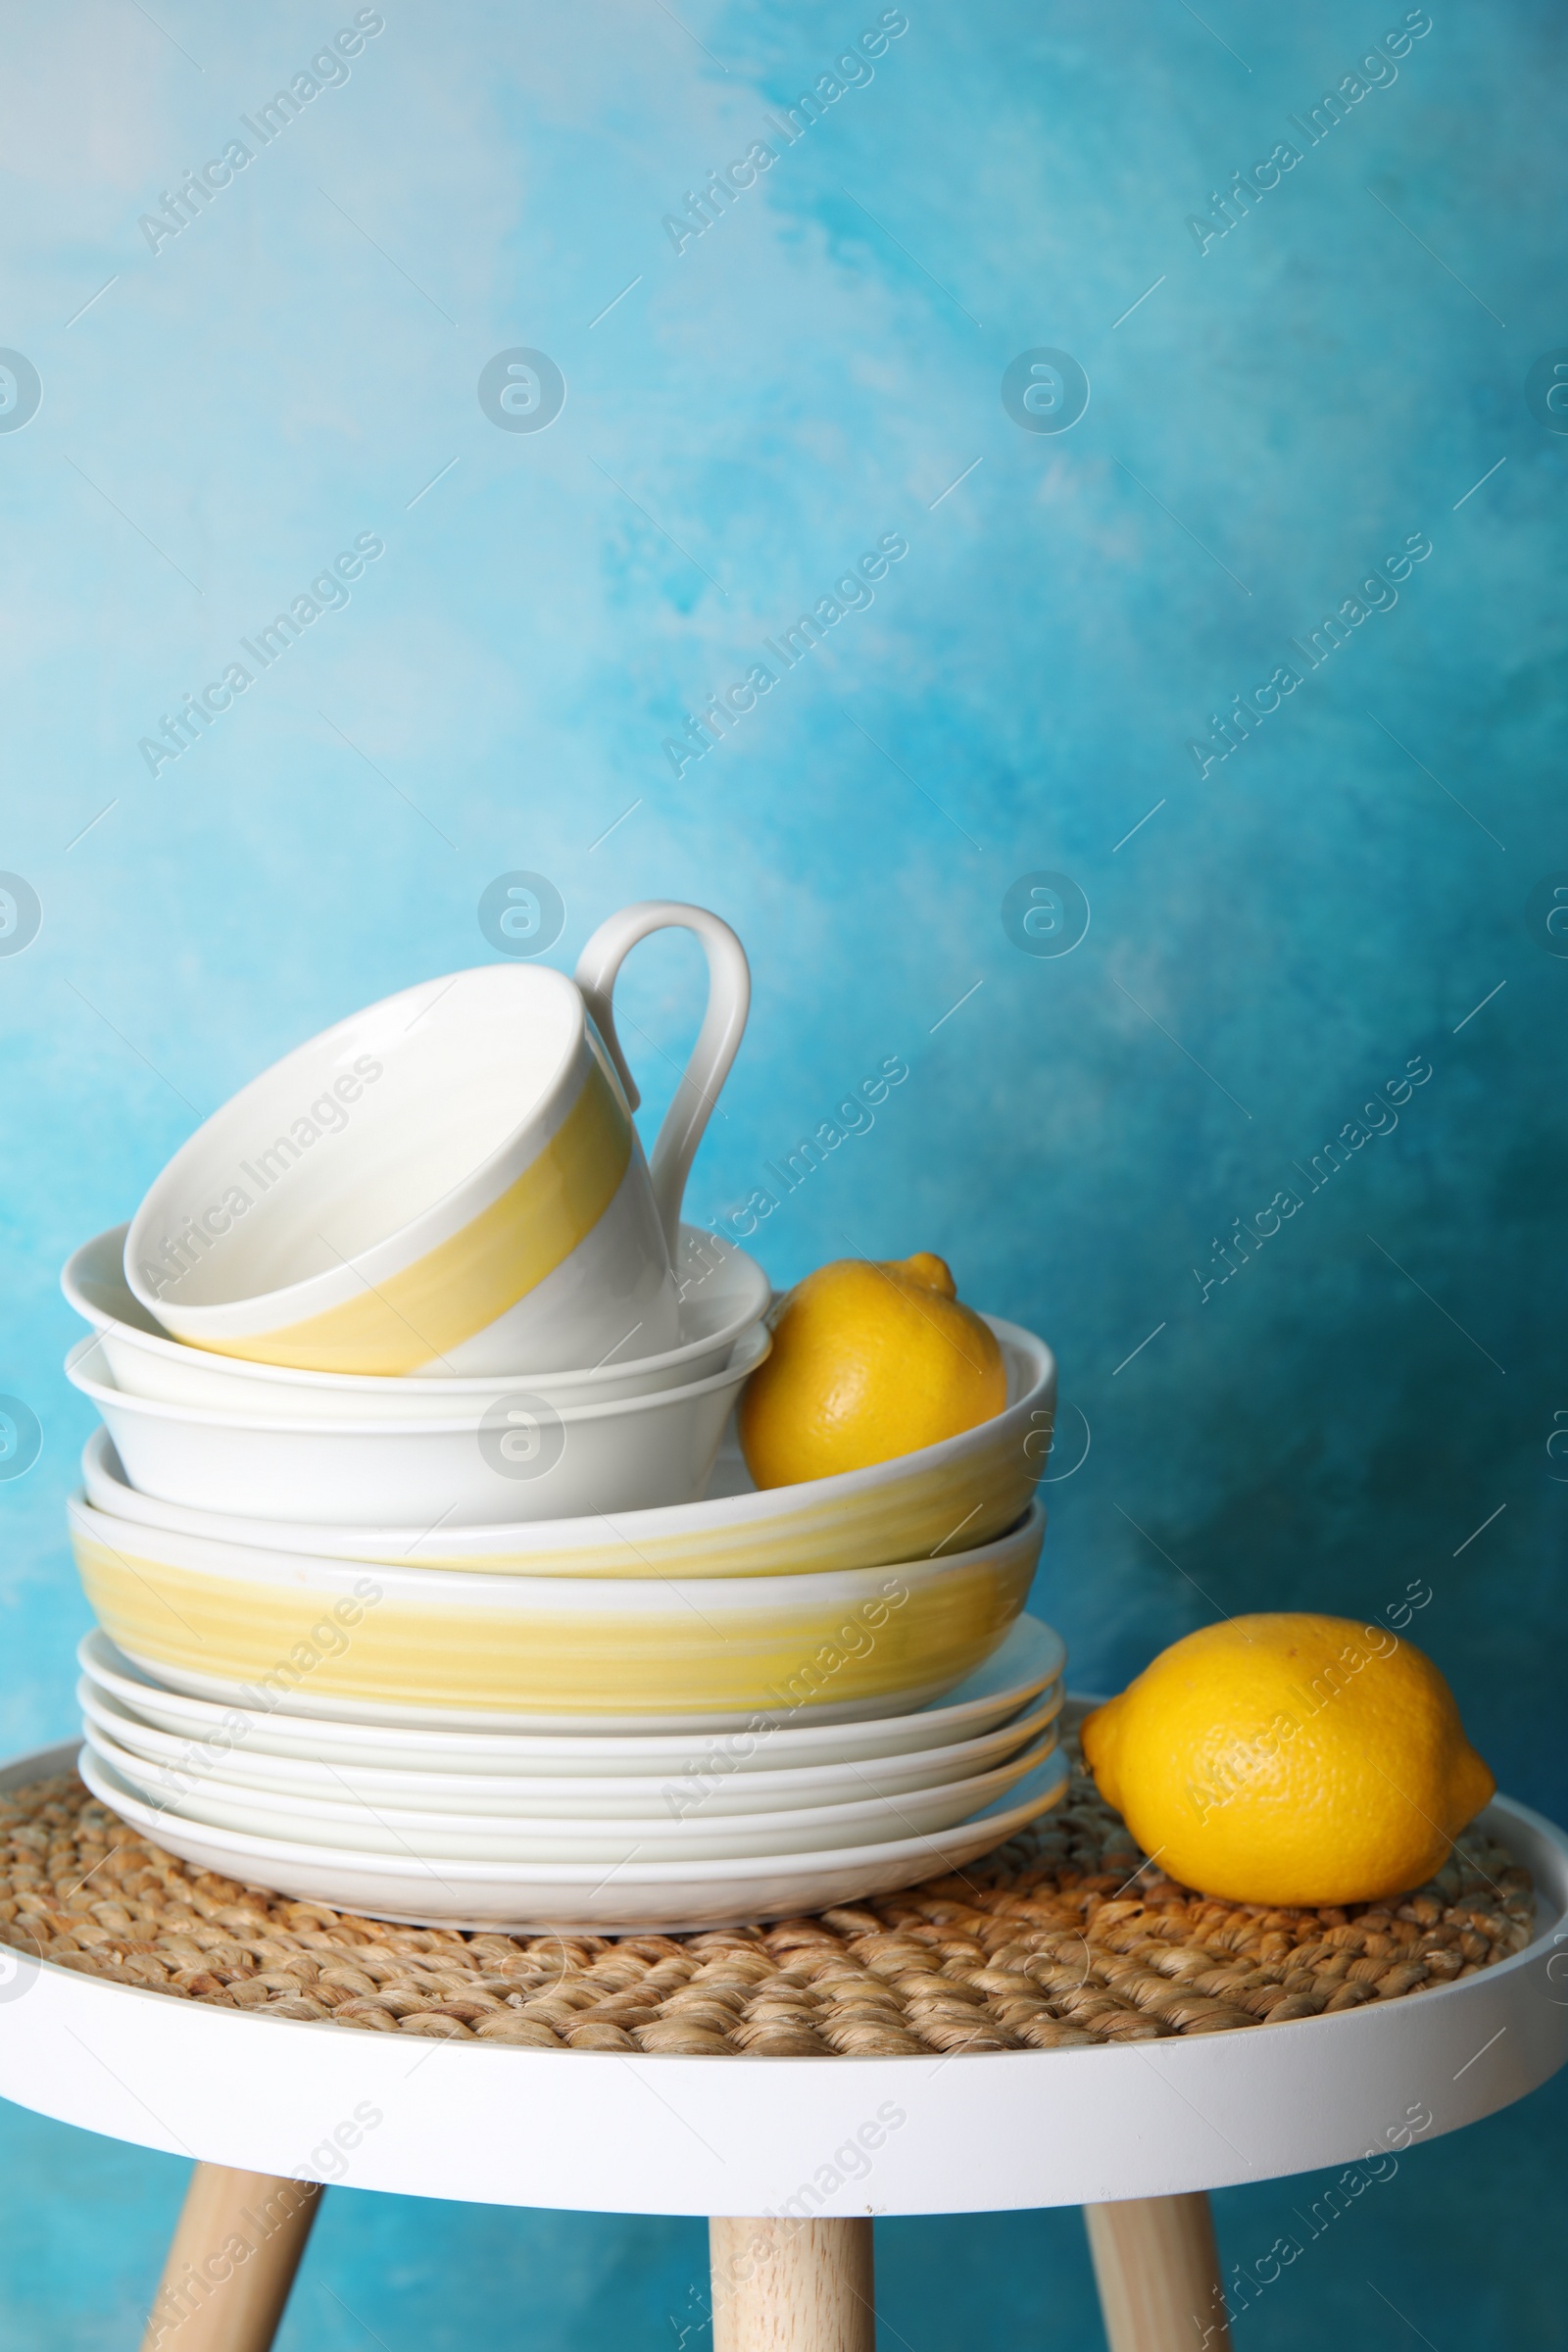 Photo of Composition with dinnerware on table against color background, space for text. Interior element